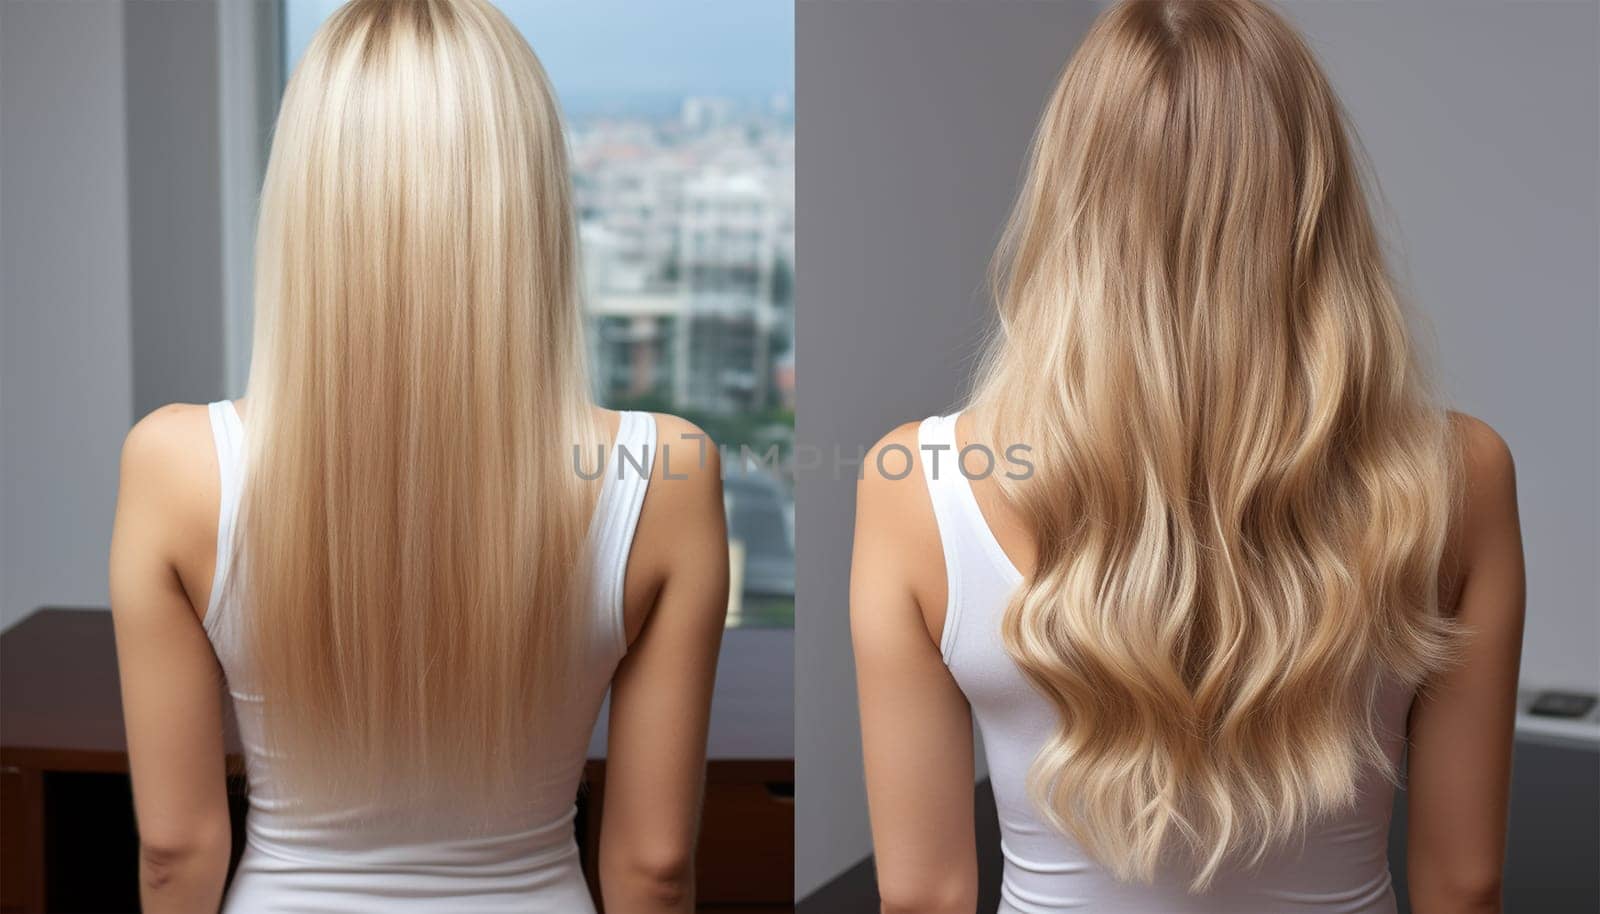 Woman before and after hair extensions on white background. Hair extension, beauty, tress, hair growth, styling, salon concept. Length and volume. Beauty hair treatment concept by Annebel146